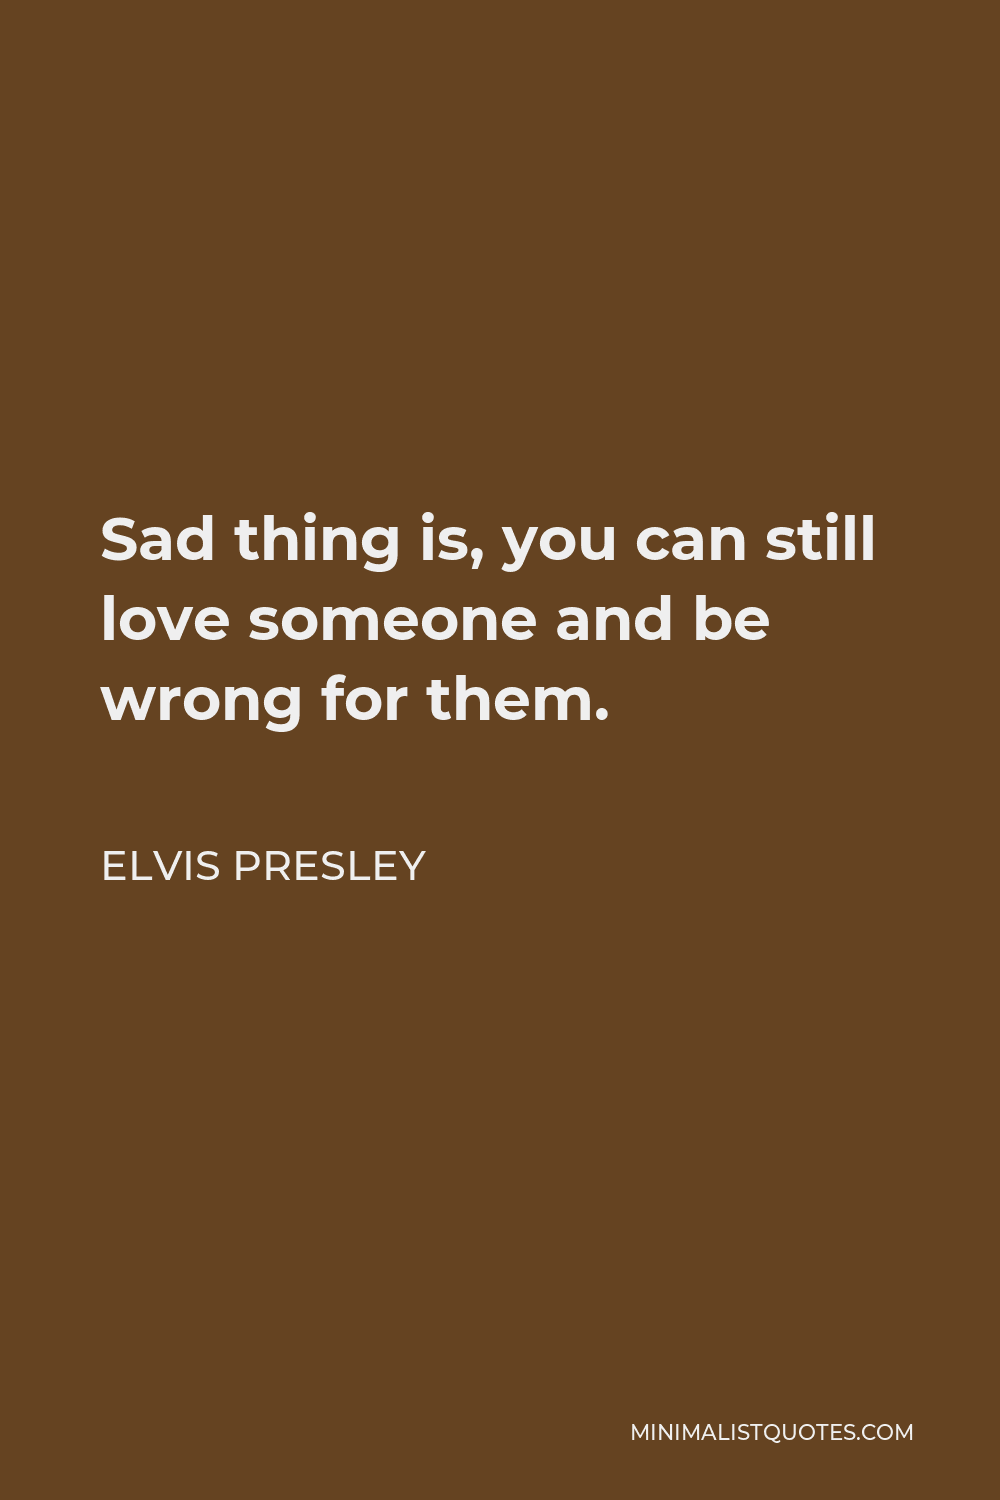 Elvis Presley Quote - Sad thing is, you can still love someone and be wrong for them.